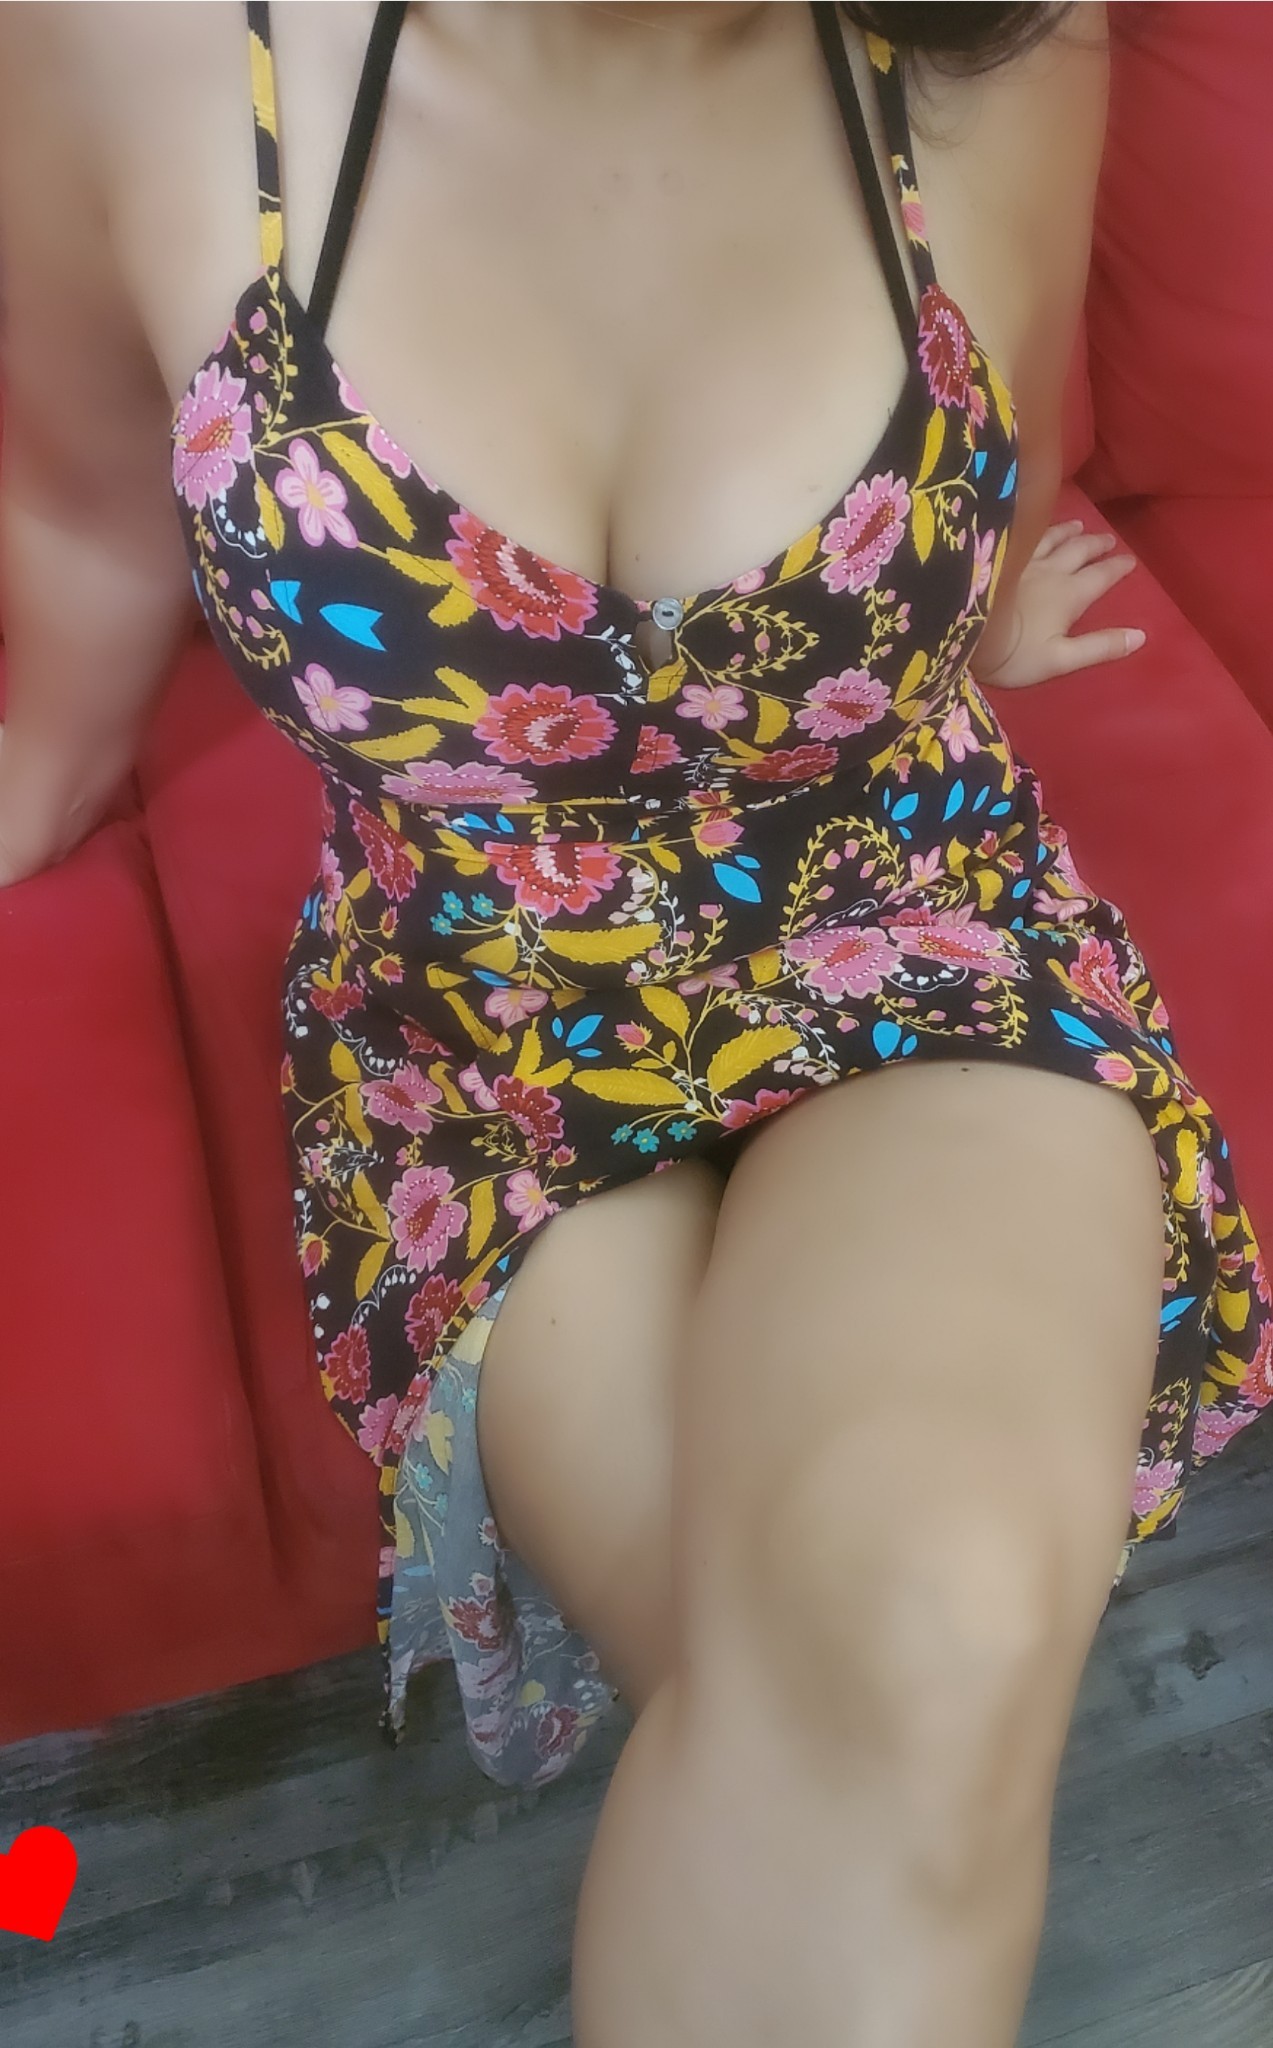 heyjasminelove-deactivated20210:Buy me a drink? I will buy you one back! 💋